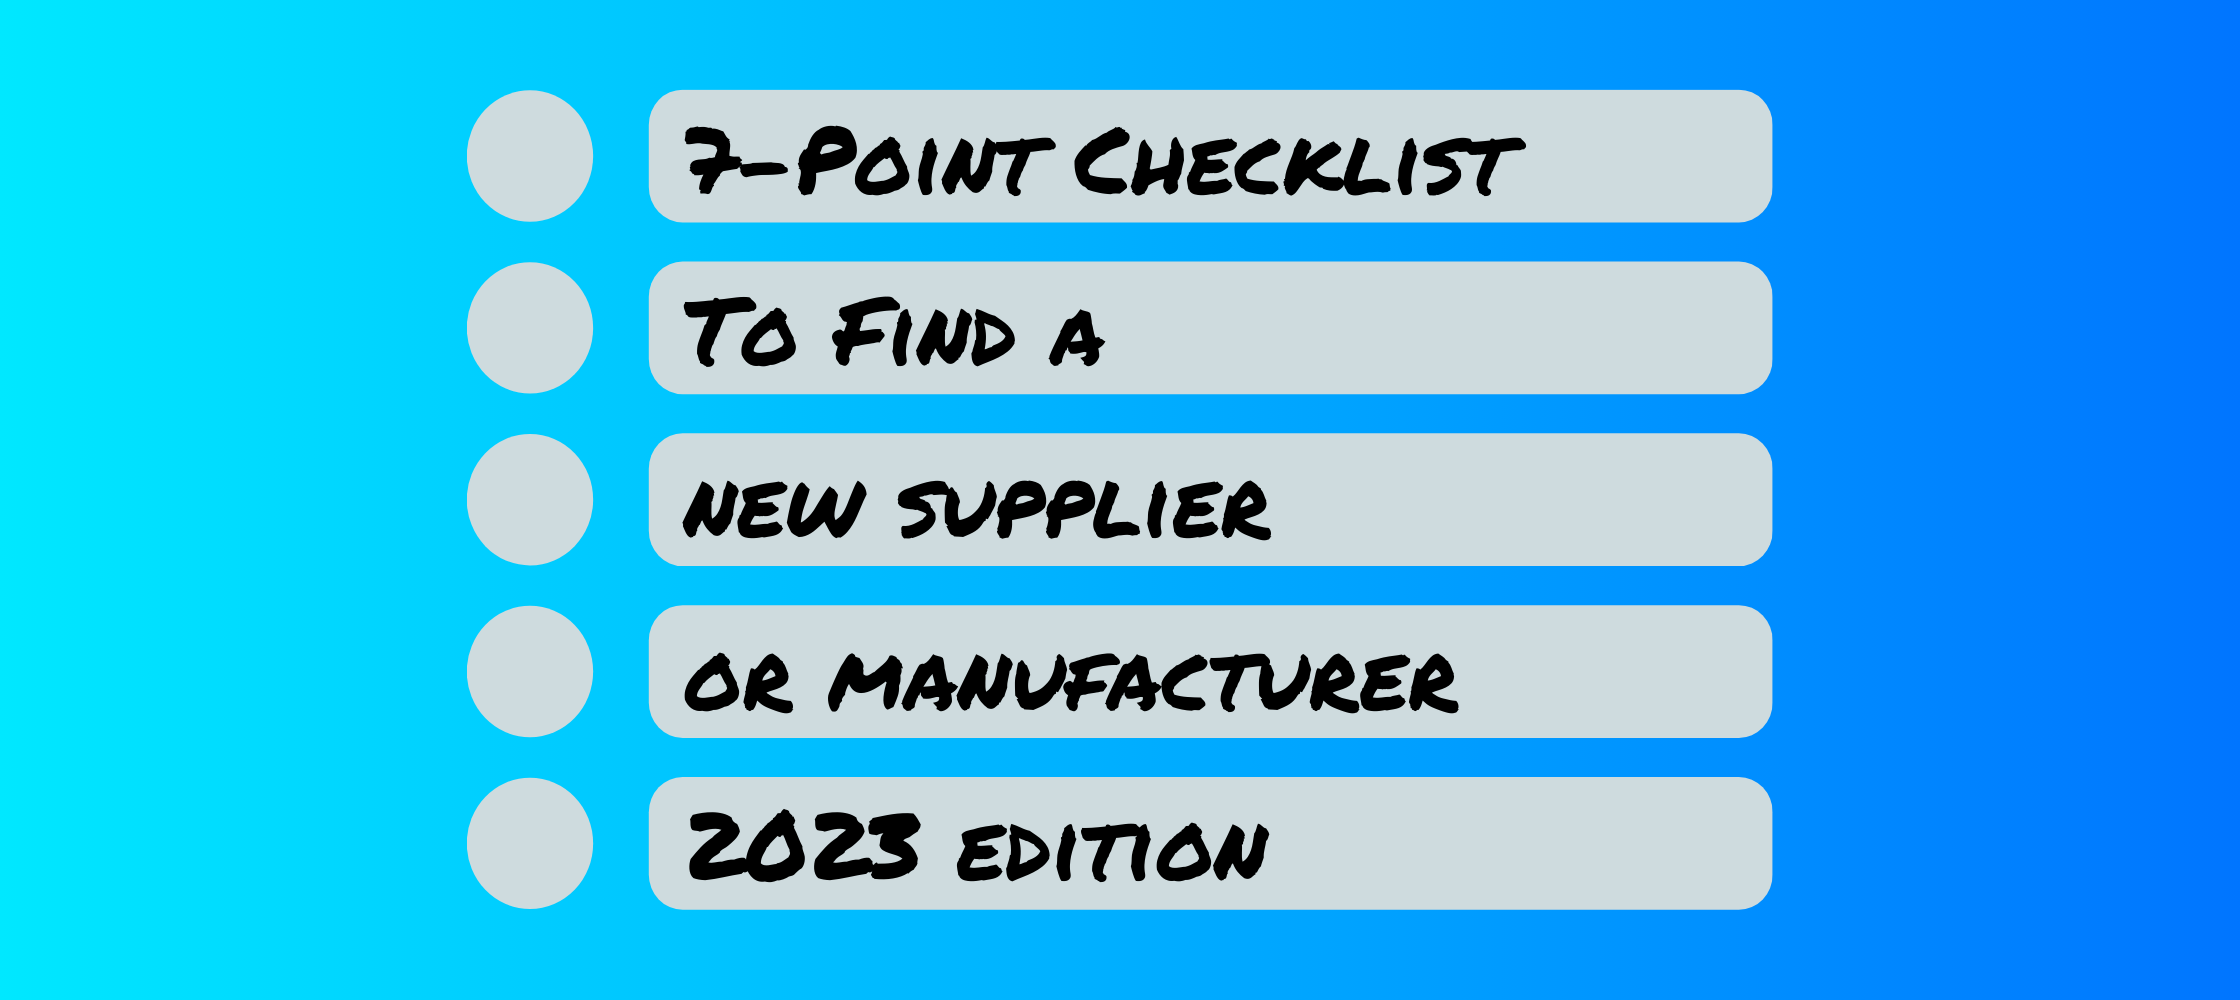 Find a supplier for your product 7-Point Checklist 2023